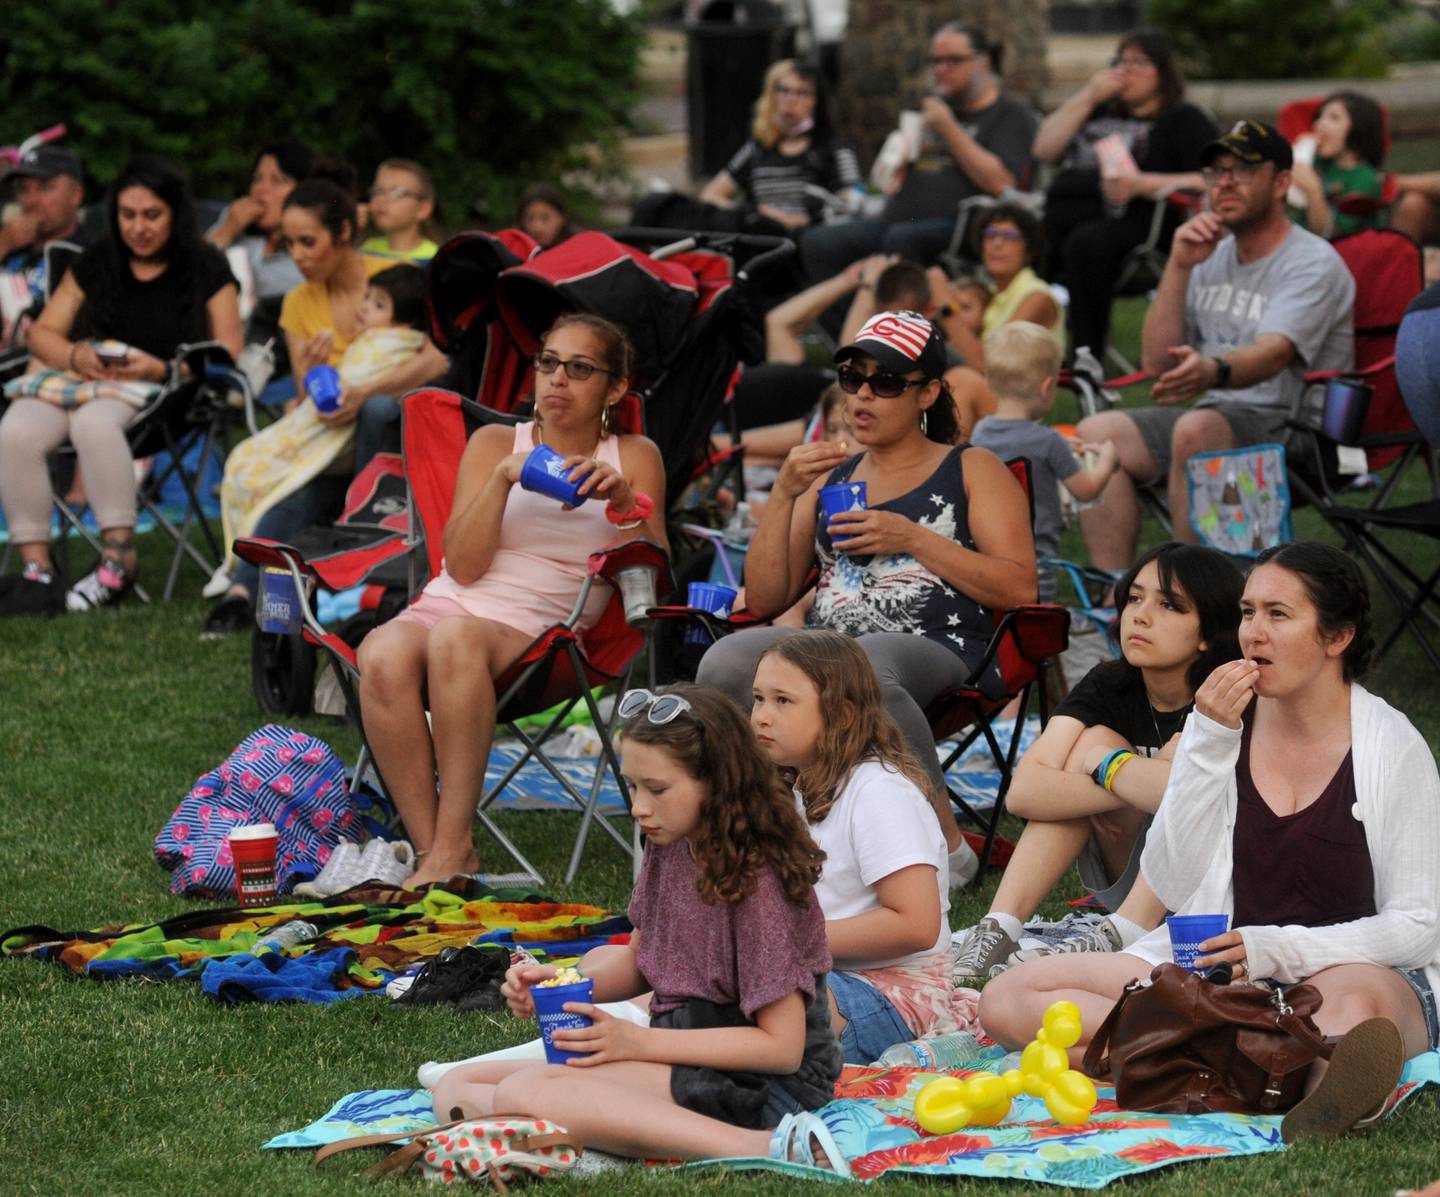 People enjoy watching “The Mitchells vs. The Machines” movie during Woodstock’s Summer in the Park Thursday June 23, 2022, in the historic Woodstock Square. The festivities that continue on Saturday, will move to the Woodstock Water Works, 1313 Kishwaukee Valley Road, for the Aqua Fiesta Party from 1 to 4 p.m. with a DJ, bags tournament and beer garden. Then come back to the Square on Sunday from noon to 4 p.m., for food, kids games, prizes, petting zoo, pony rides, bounce house, balloon creations, bingo, a Theatre 121 children’s show and Woodstock area nonprofit booths.